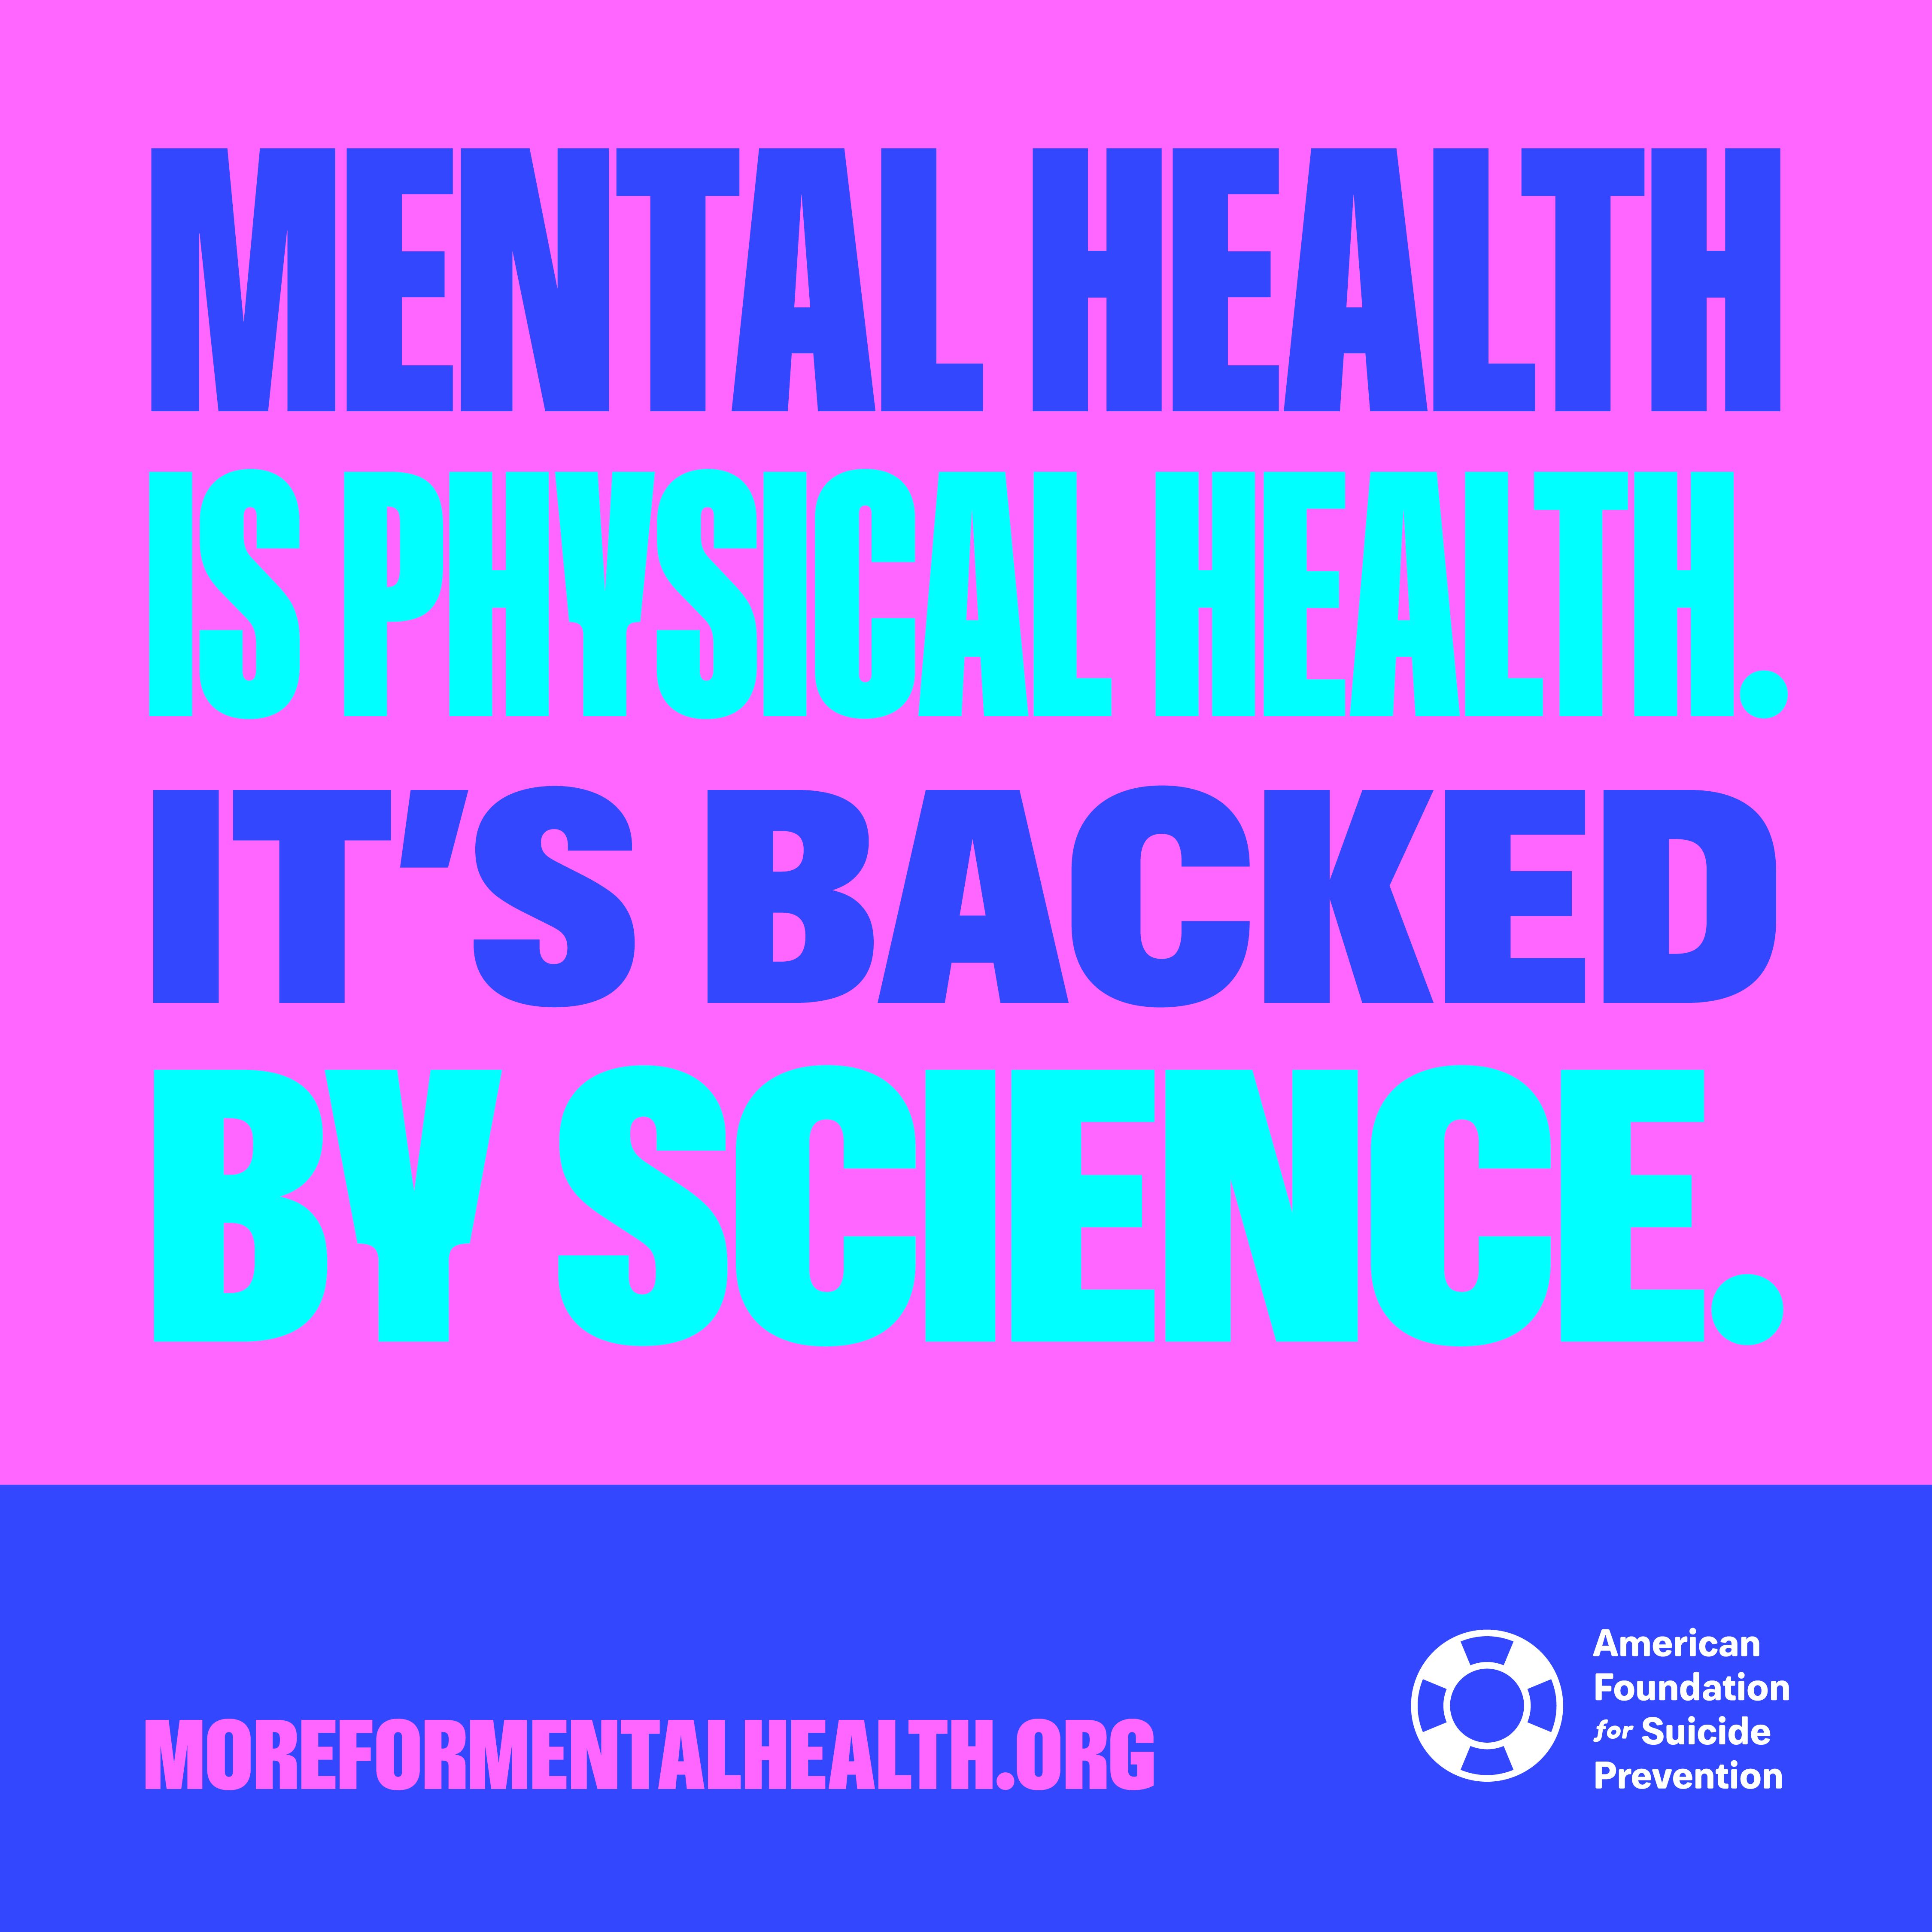 Mental health is physical health. It's backed by science.